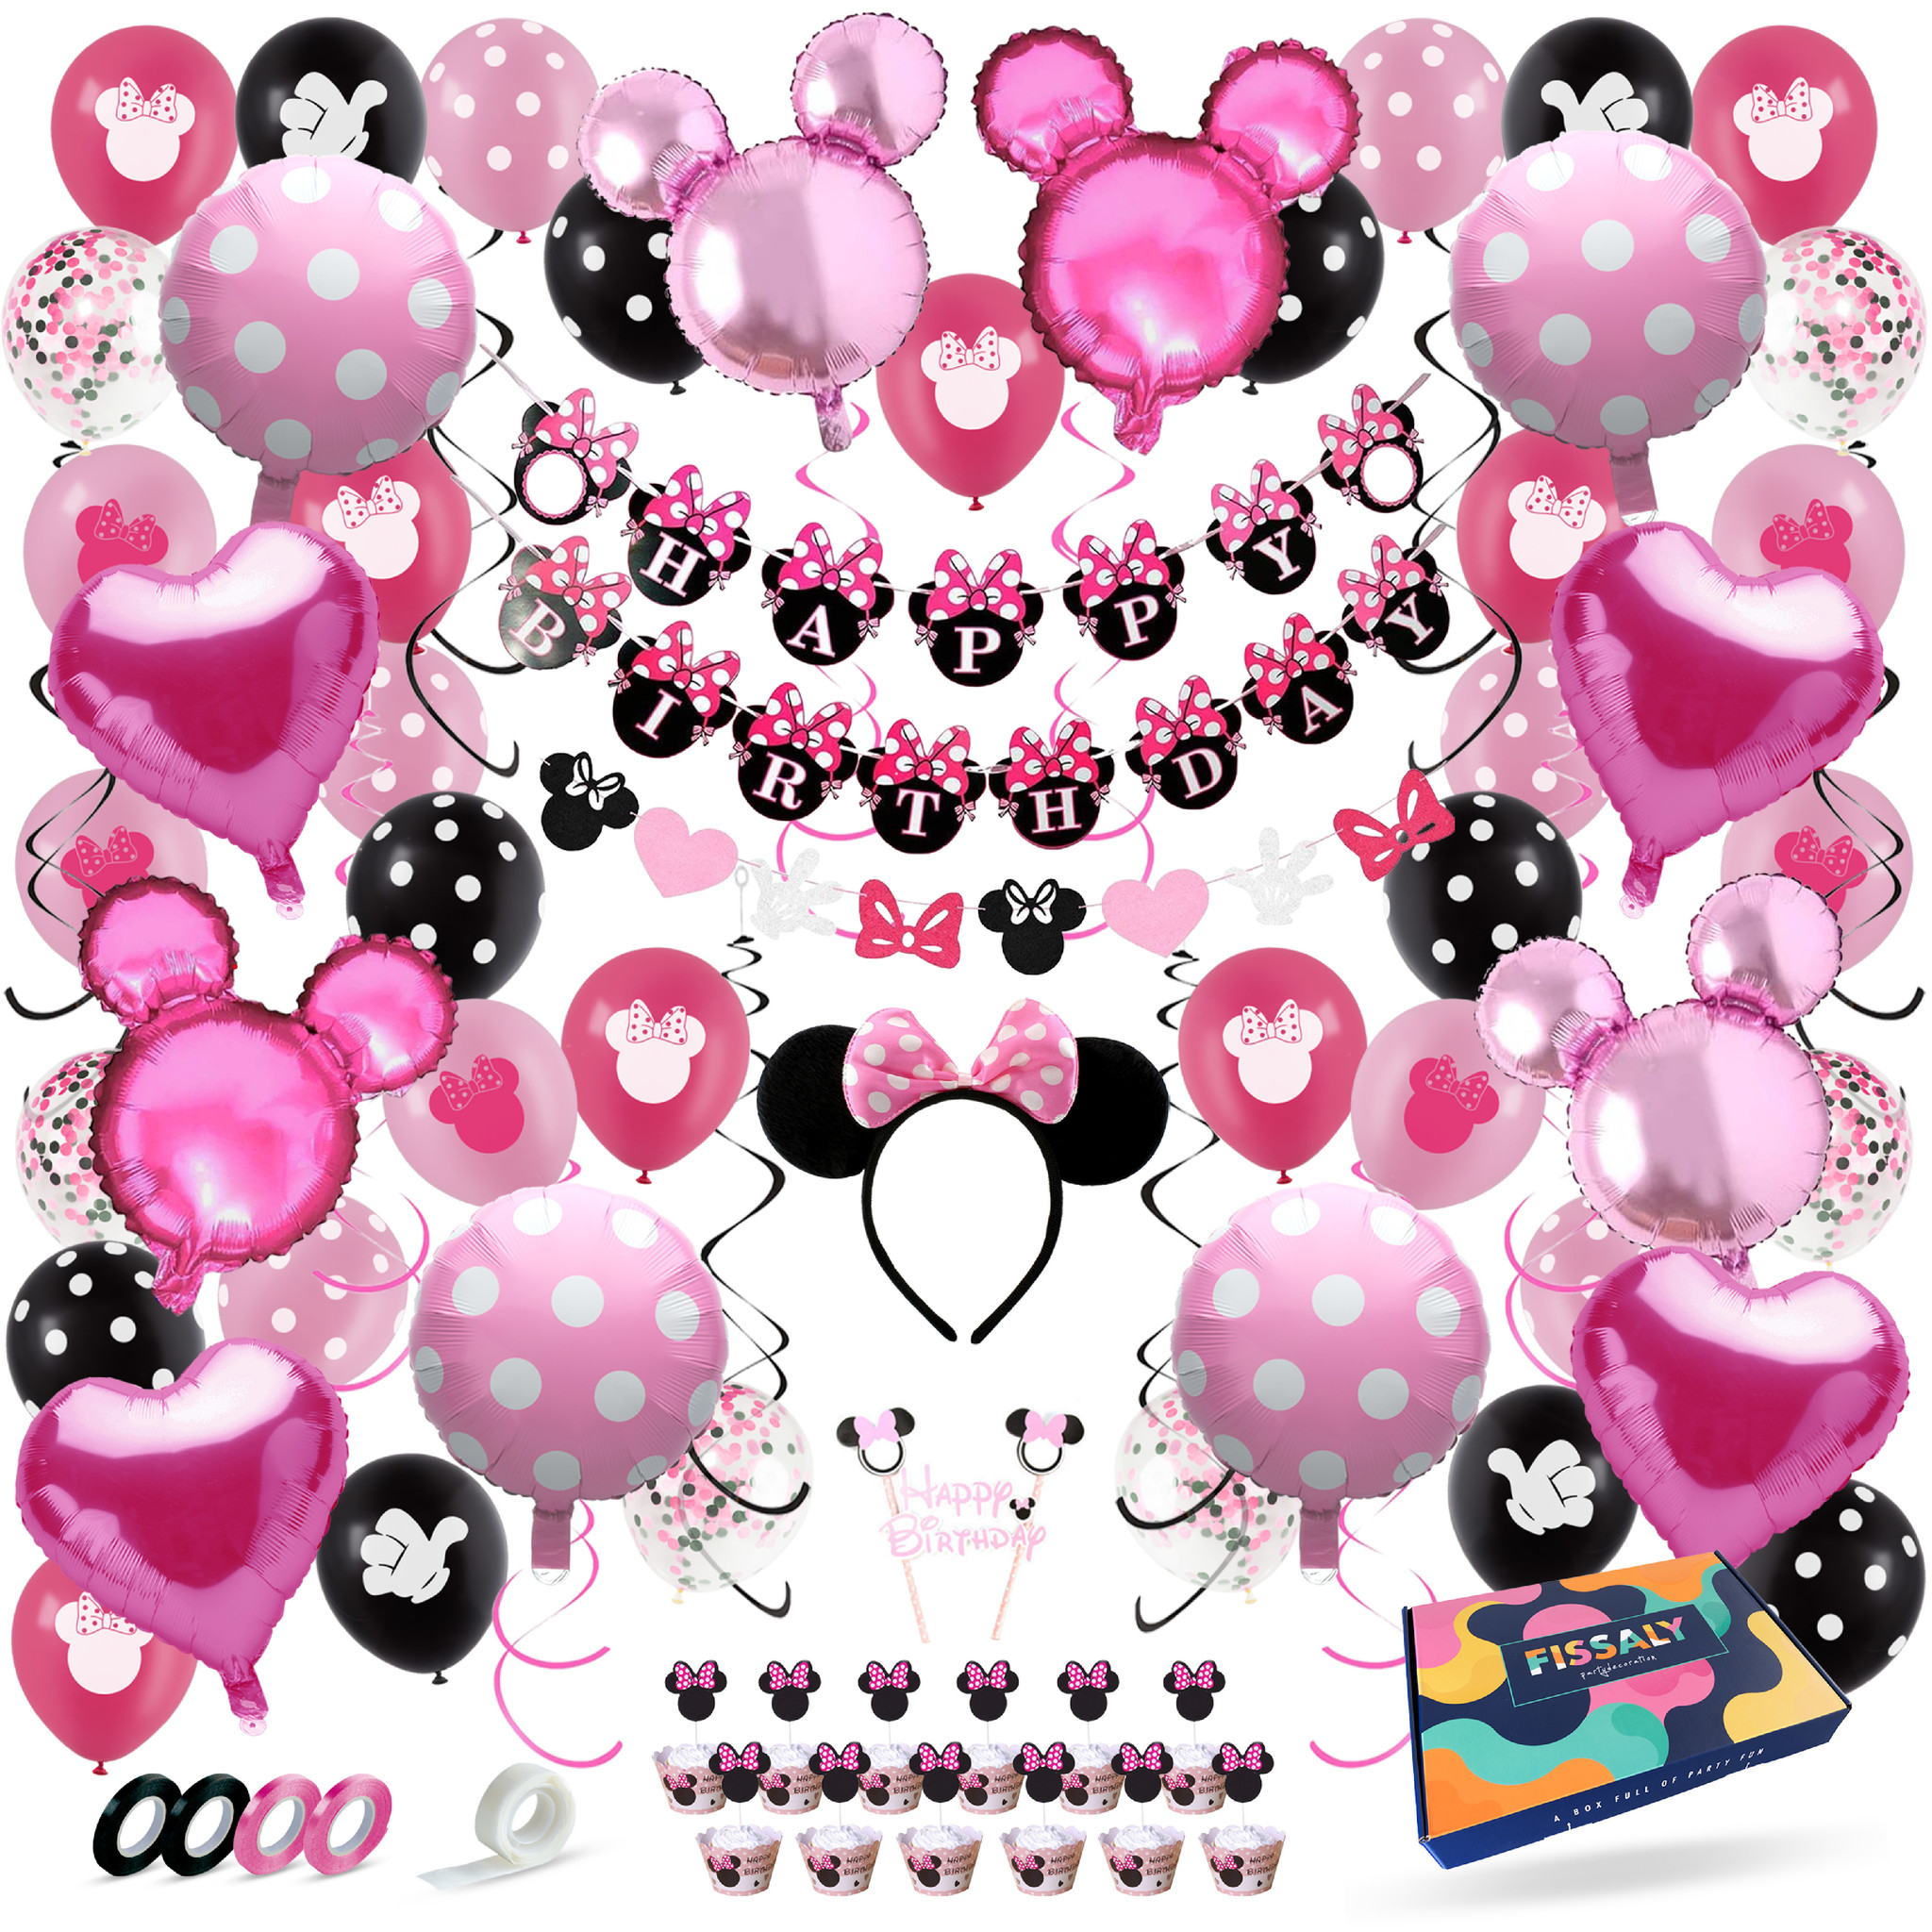 Sobriquette Talloos Getand Fissaly® Minnie Mouse Thema Decoratie - Fissaly